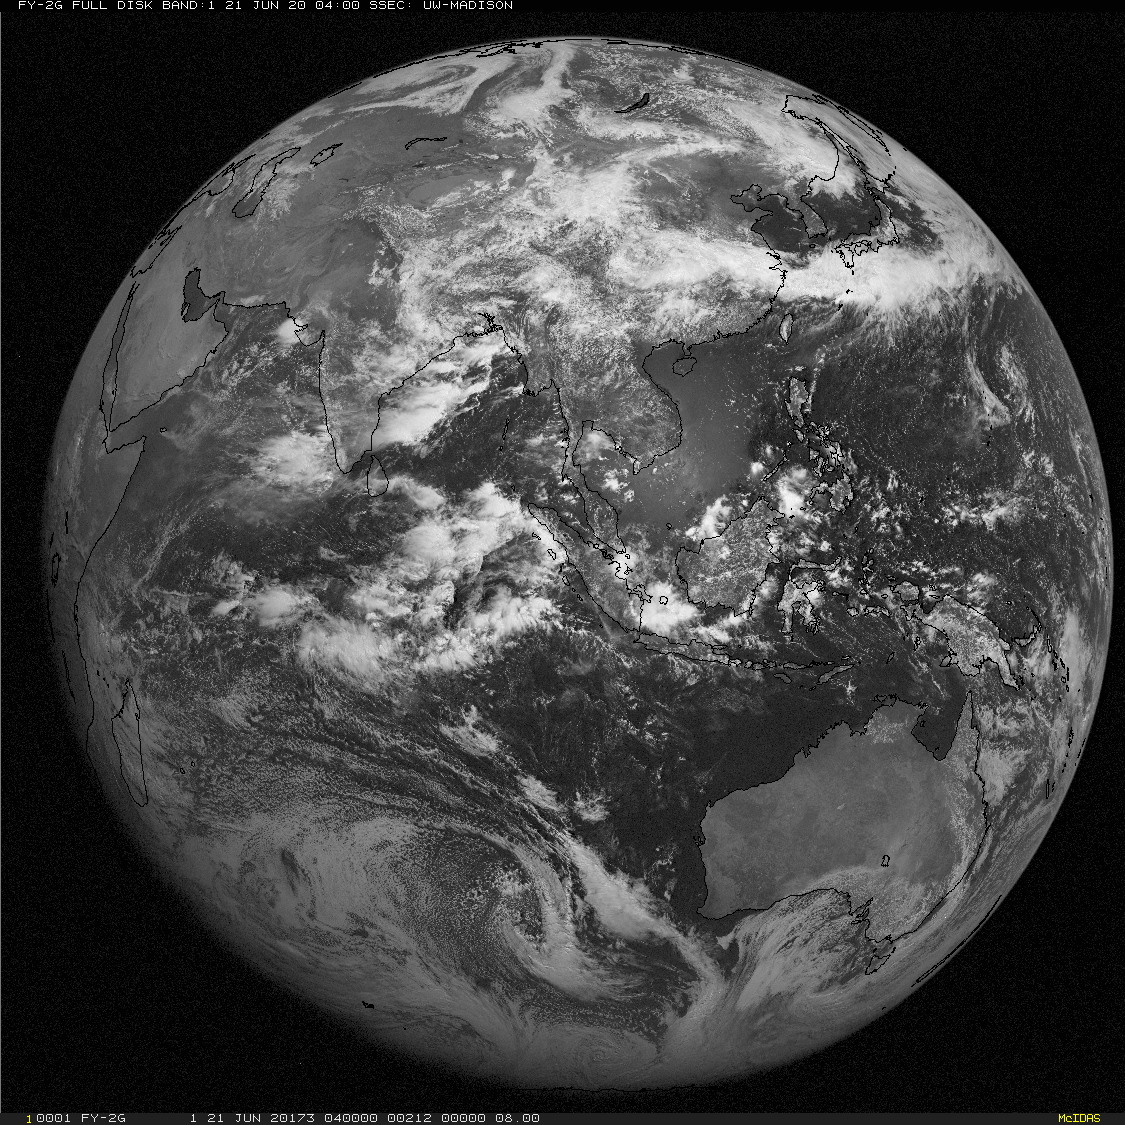 FY-2G Visible images [click to enlarge]